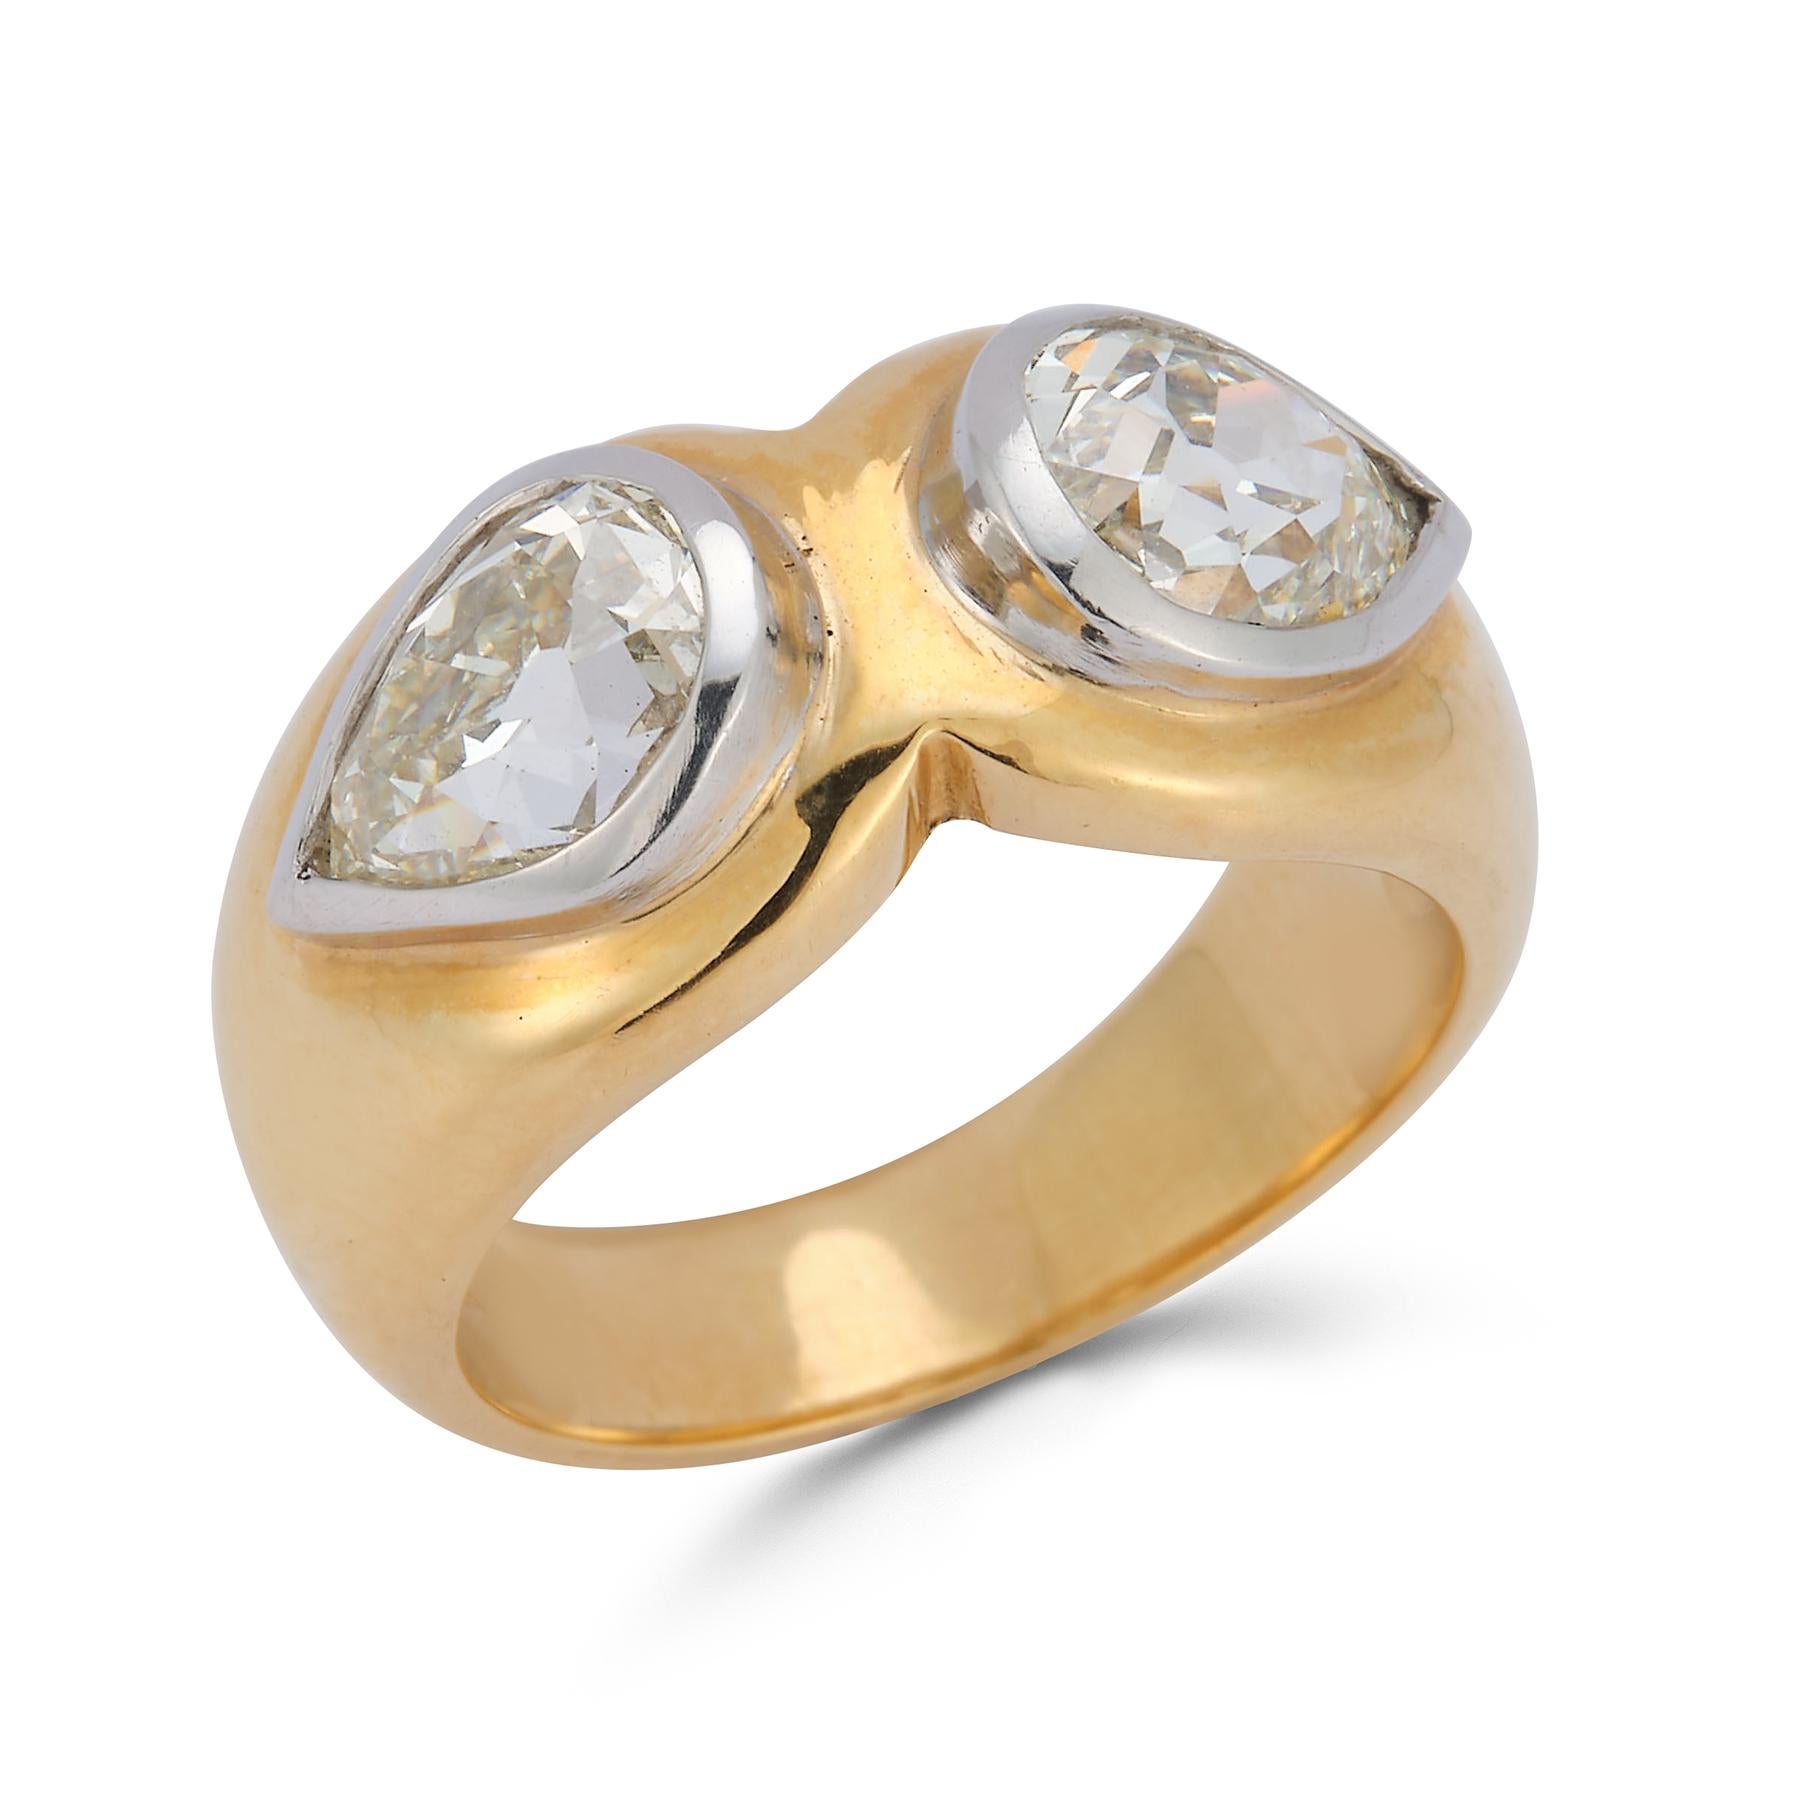 Two Pear Shape Diamond Ring

2 pear shape diamonds approximately 1.60 cts set in 18k yellow gold

Ring Size: 4.5